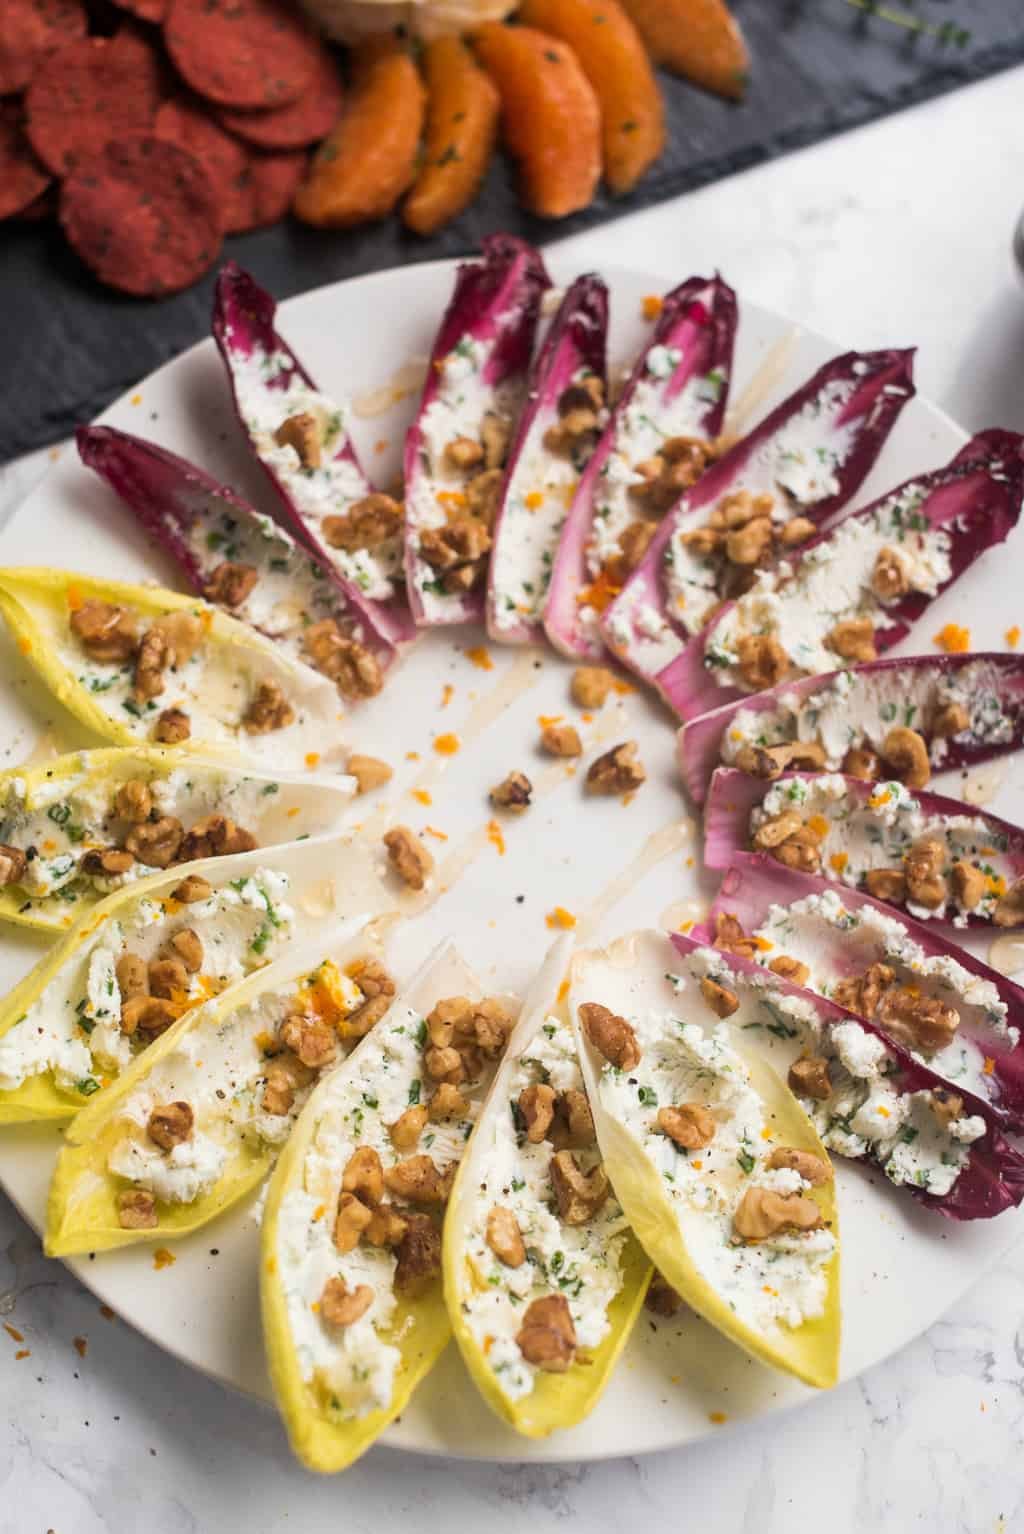 Stuffed Endive with Walnuts and Honey Recipe